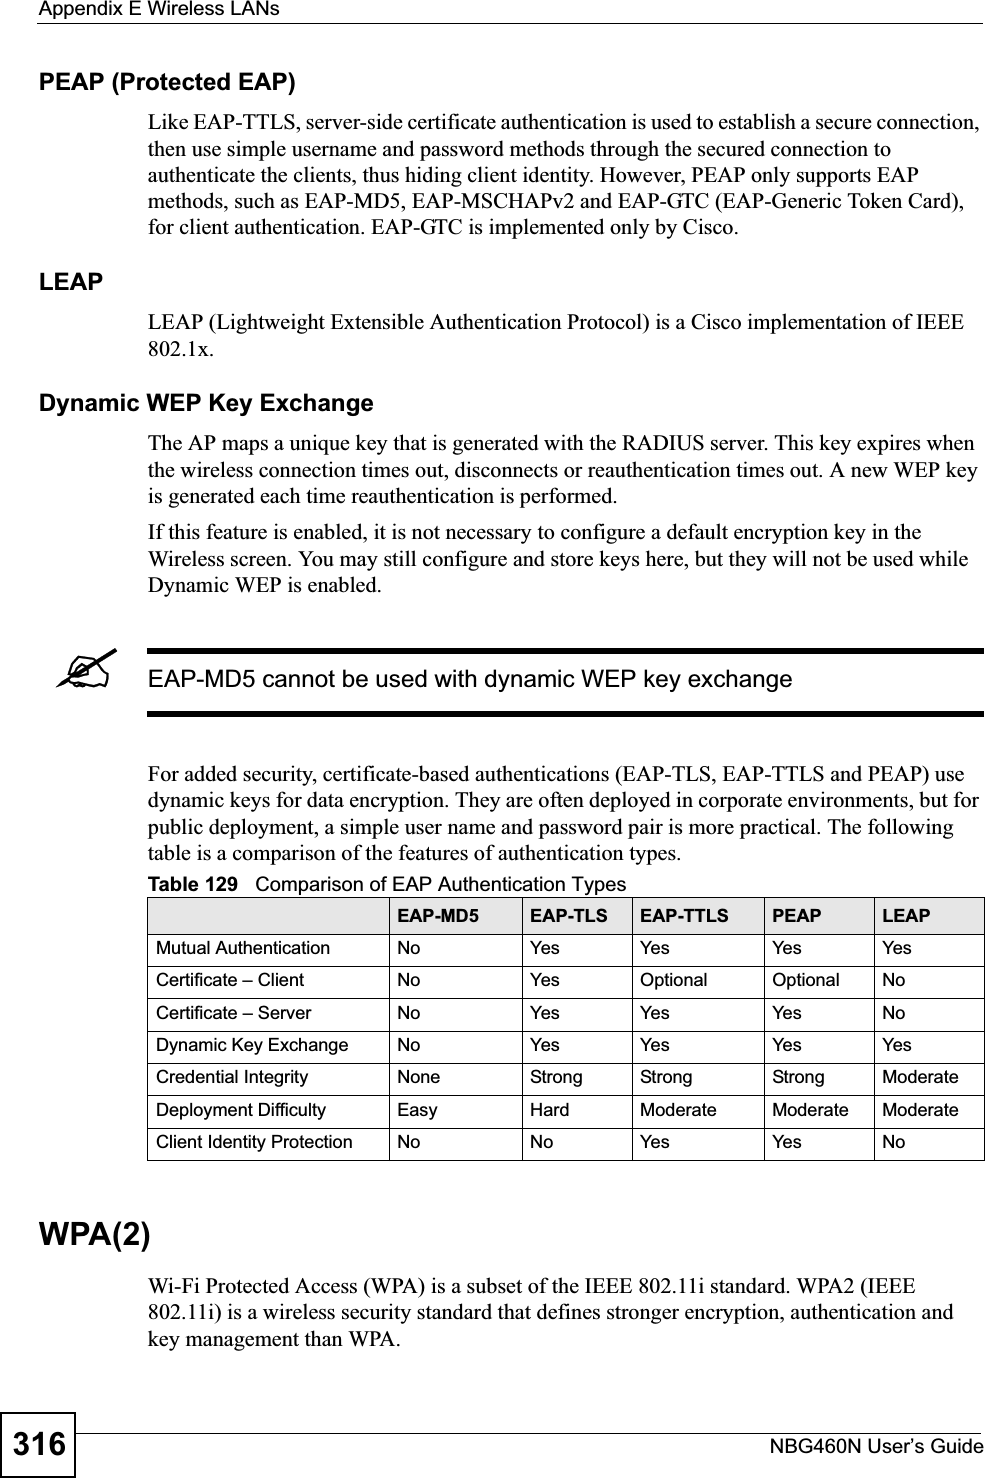 Appendix E Wireless LANsNBG460N User’s Guide316PEAP (Protected EAP)Like EAP-TTLS, server-side certificate authentication is used to establish a secure connection, then use simple username and password methods through the secured connection to authenticate the clients, thus hiding client identity. However, PEAP only supports EAP methods, such as EAP-MD5, EAP-MSCHAPv2 and EAP-GTC (EAP-Generic Token Card), for client authentication. EAP-GTC is implemented only by Cisco.LEAPLEAP (Lightweight Extensible Authentication Protocol) is a Cisco implementation of IEEE 802.1x. Dynamic WEP Key ExchangeThe AP maps a unique key that is generated with the RADIUS server. This key expires when the wireless connection times out, disconnects or reauthentication times out. A new WEP key is generated each time reauthentication is performed.If this feature is enabled, it is not necessary to configure a default encryption key in the Wireless screen. You may still configure and store keys here, but they will not be used while Dynamic WEP is enabled.&quot;EAP-MD5 cannot be used with dynamic WEP key exchangeFor added security, certificate-based authentications (EAP-TLS, EAP-TTLS and PEAP) use dynamic keys for data encryption. They are often deployed in corporate environments, but for public deployment, a simple user name and password pair is more practical. The following table is a comparison of the features of authentication types.WPA(2)Wi-Fi Protected Access (WPA) is a subset of the IEEE 802.11i standard. WPA2 (IEEE 802.11i) is a wireless security standard that defines stronger encryption, authentication and key management than WPA. Table 129   Comparison of EAP Authentication TypesEAP-MD5 EAP-TLS EAP-TTLS PEAP LEAPMutual Authentication No Yes Yes Yes YesCertificate – Client No Yes Optional Optional NoCertificate – Server No Yes Yes Yes NoDynamic Key Exchange No Yes Yes Yes YesCredential Integrity None Strong Strong Strong ModerateDeployment Difficulty Easy Hard Moderate Moderate ModerateClient Identity Protection No No Yes Yes No